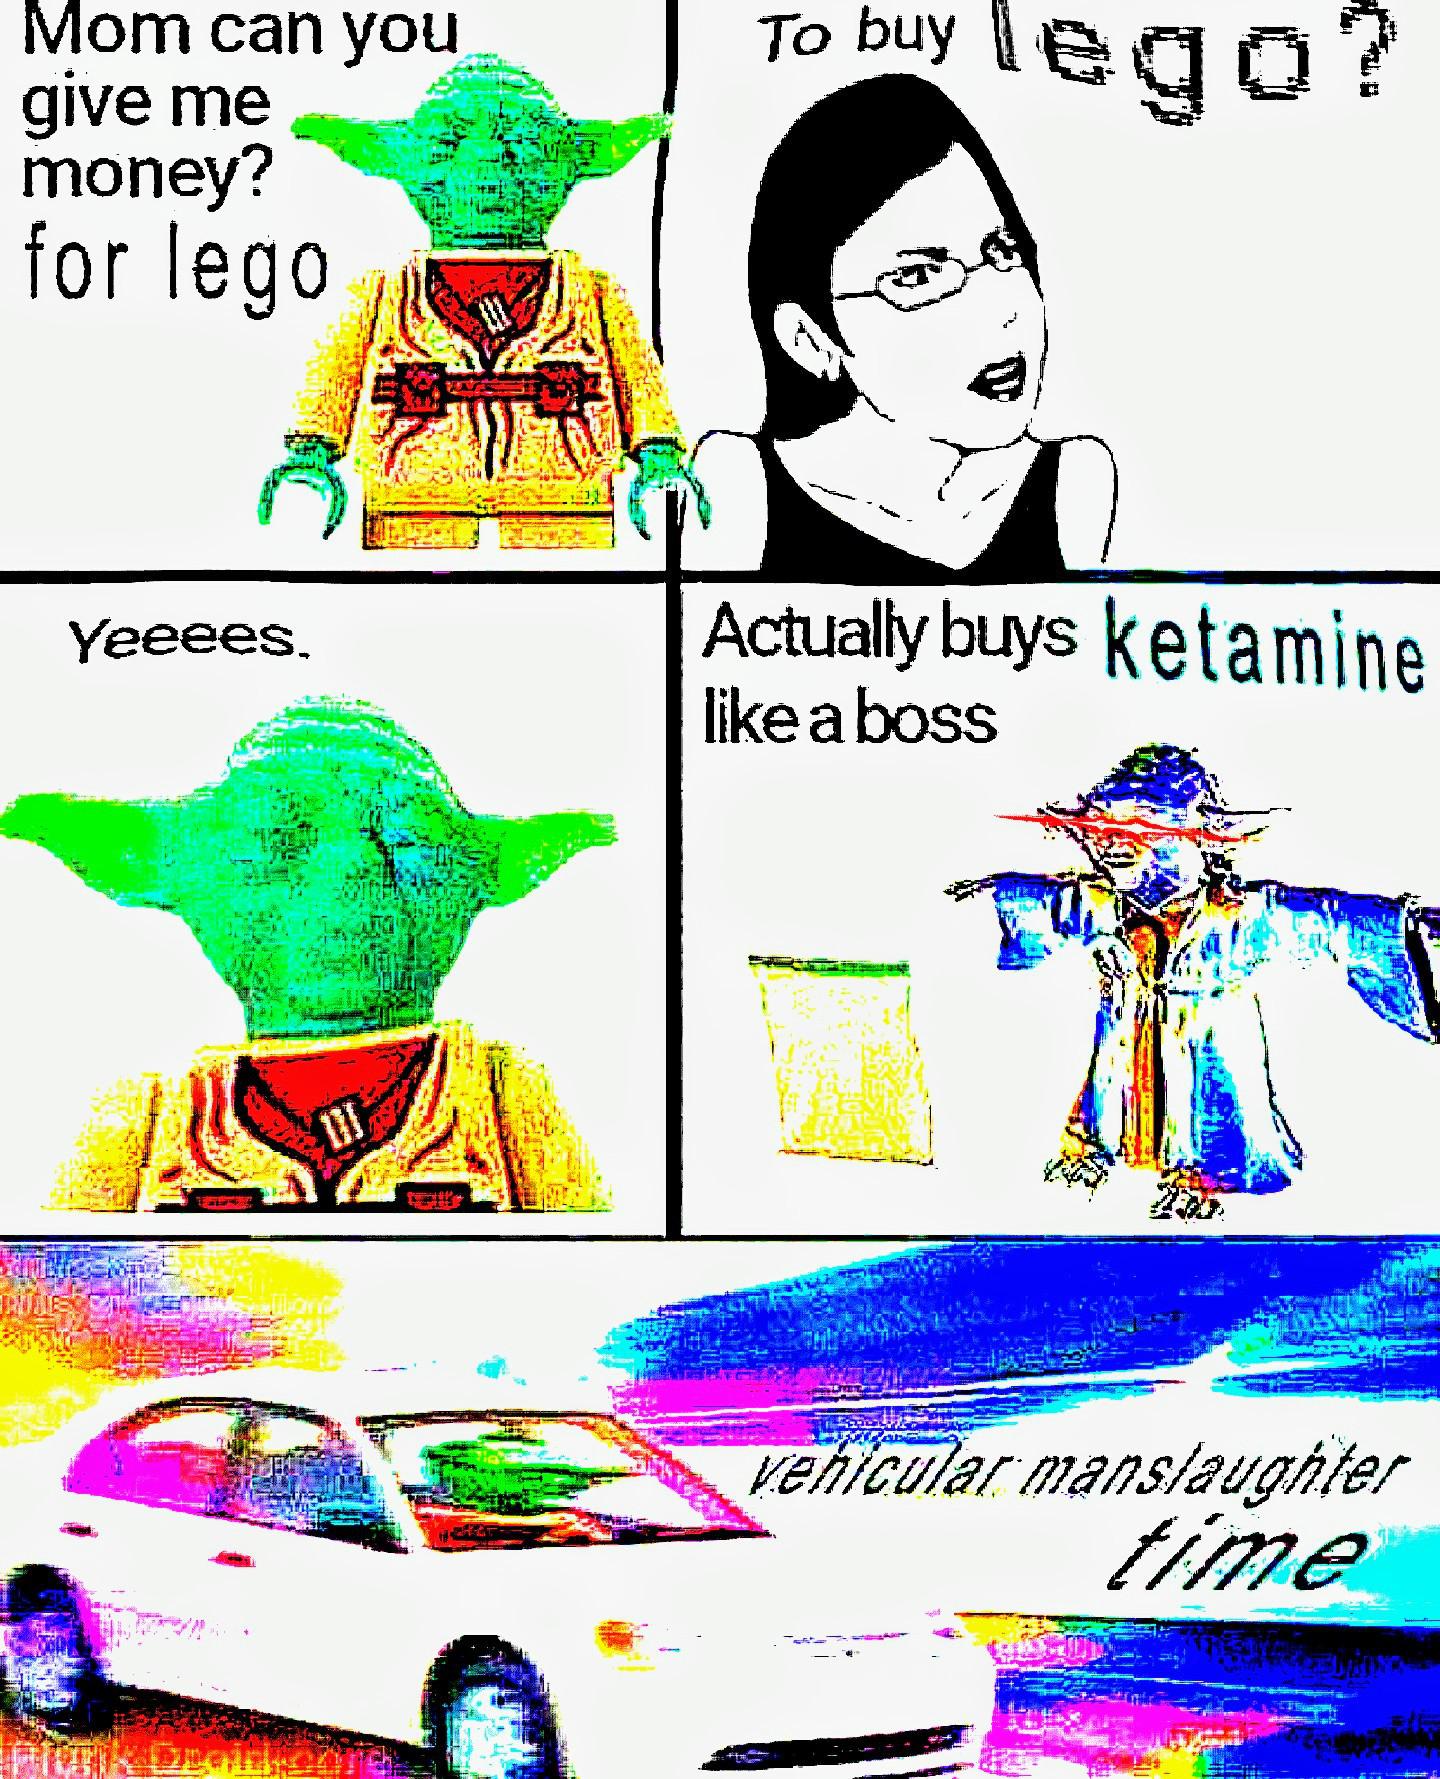 Deep-fried, Lego Deep Fried Memes Deep-fried, Lego text: om can you give me money? for [ego To buy Acwaltybws like 